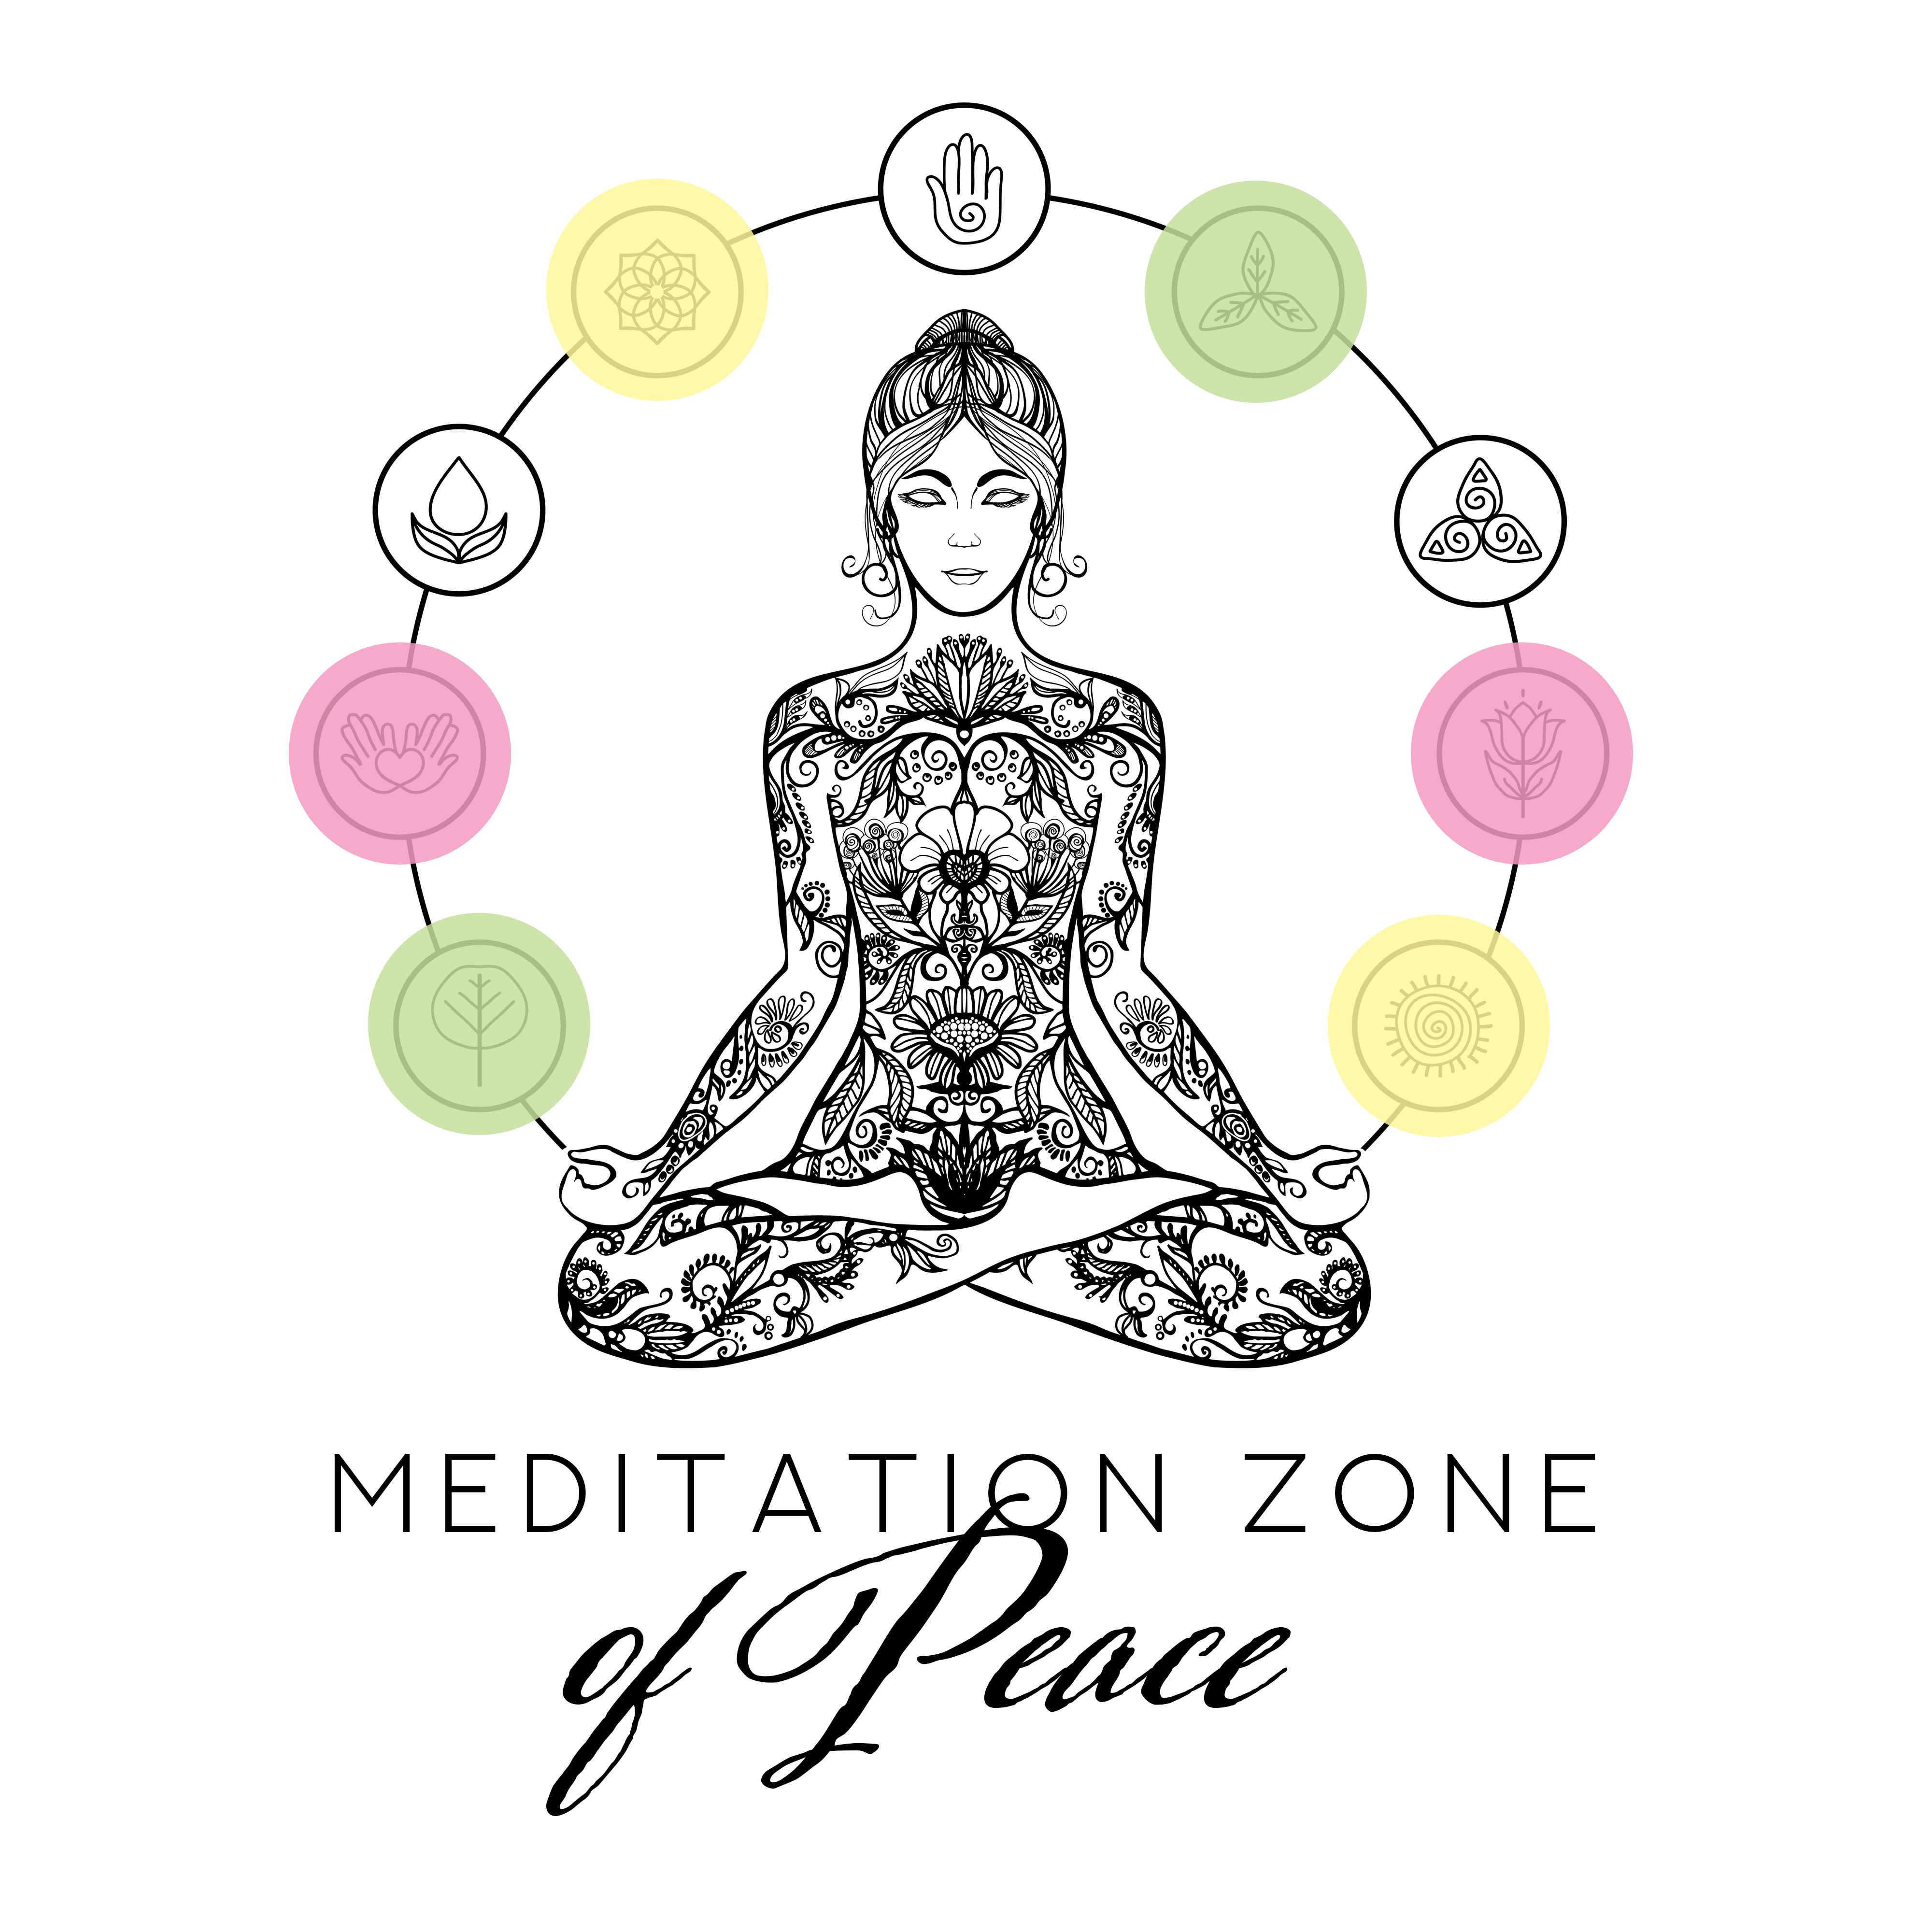 Meditation Zone of Peace - Mantra in Meditation, Deep Concentration, Inner Balance, Asian Zen, Yoga Meditation, Lounge, Harmony of Deep Meditation